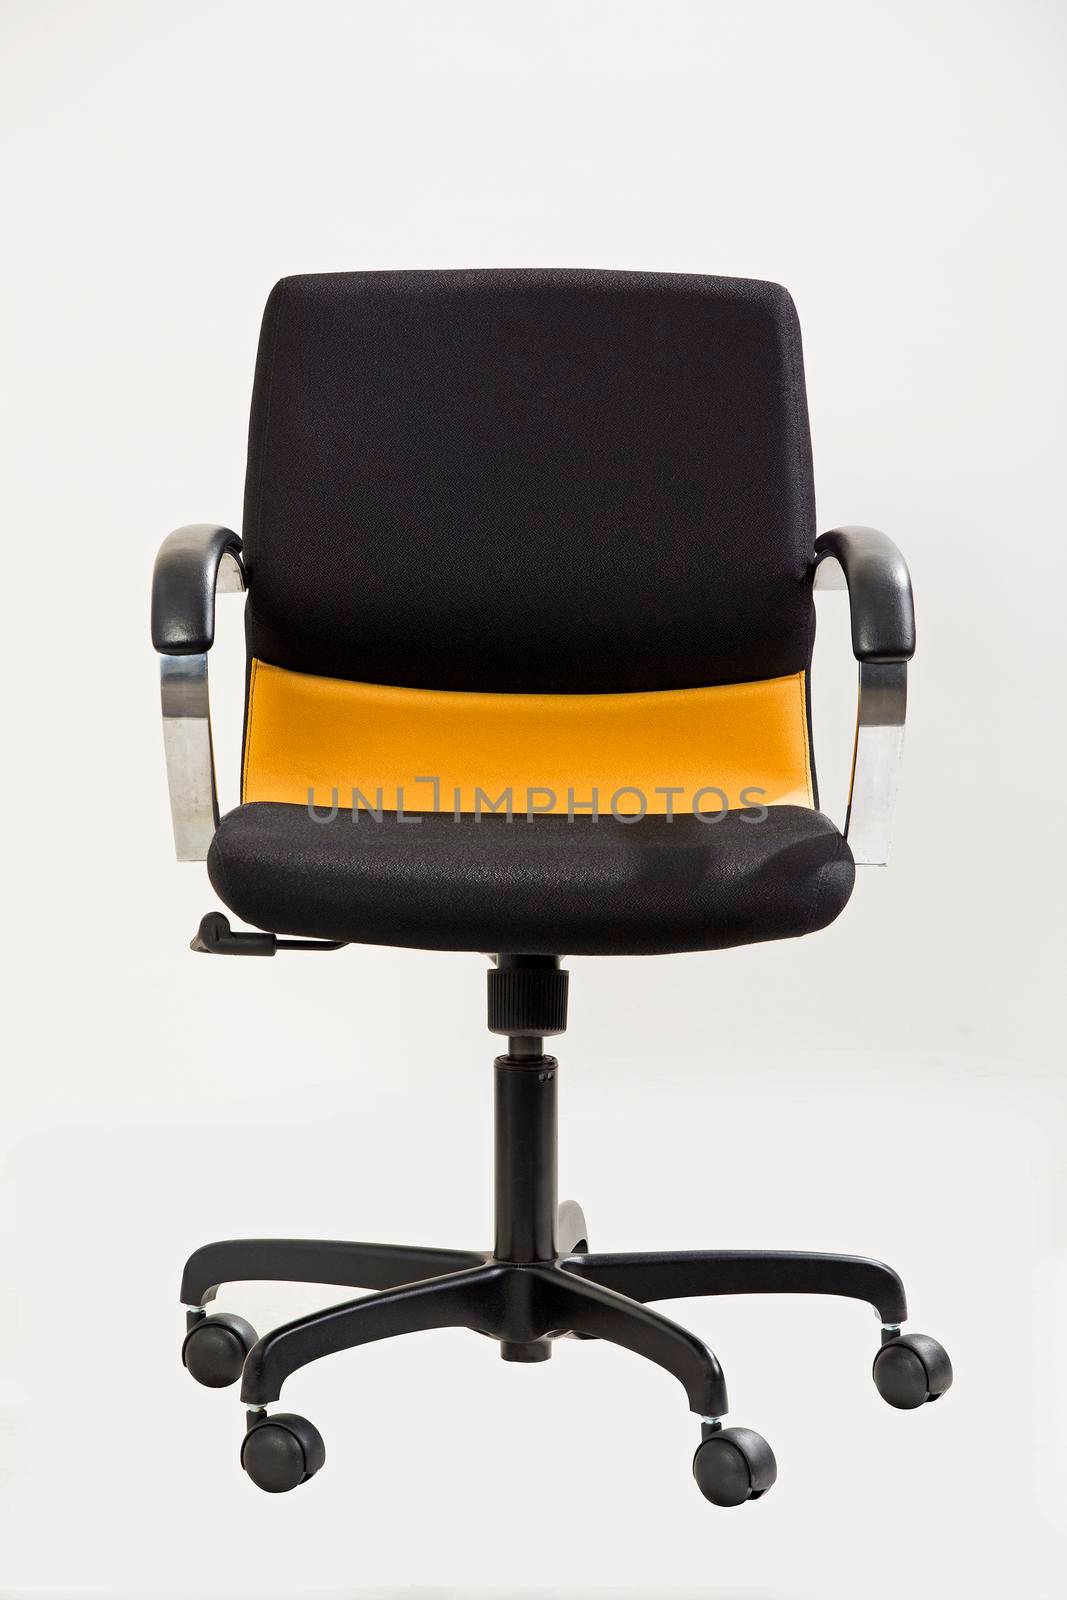 Office chair on white background by titipong